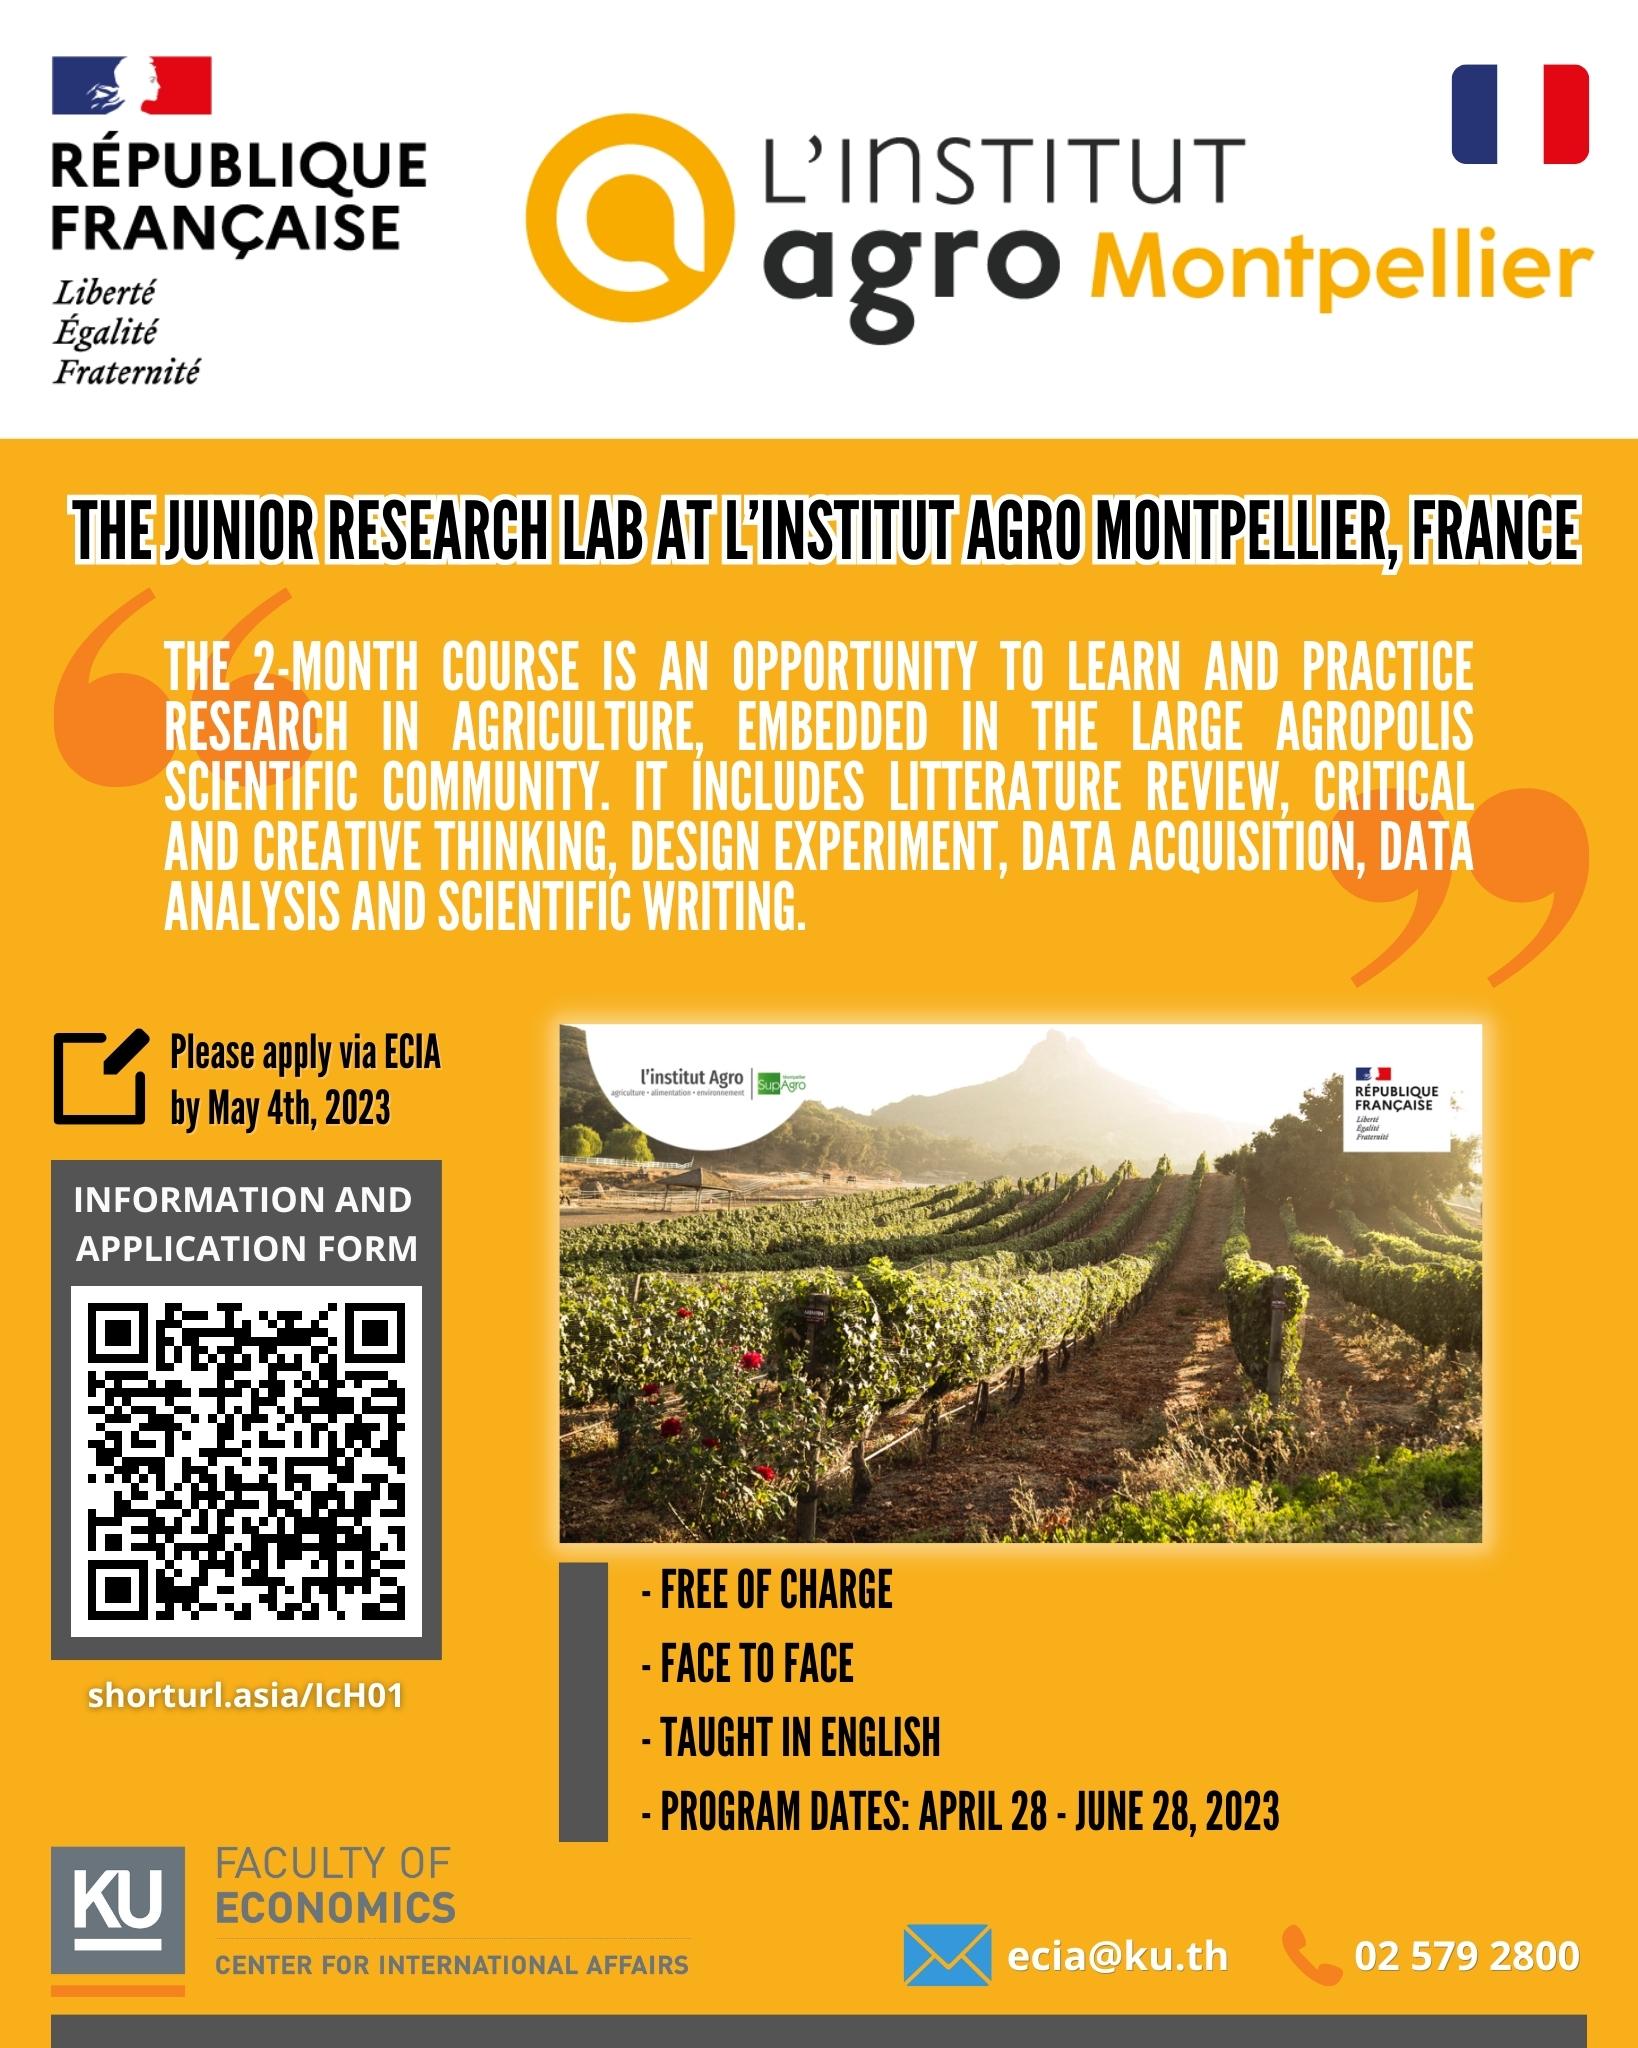 The Junior Research Lab at Institut Agro Montpellier (south of France)